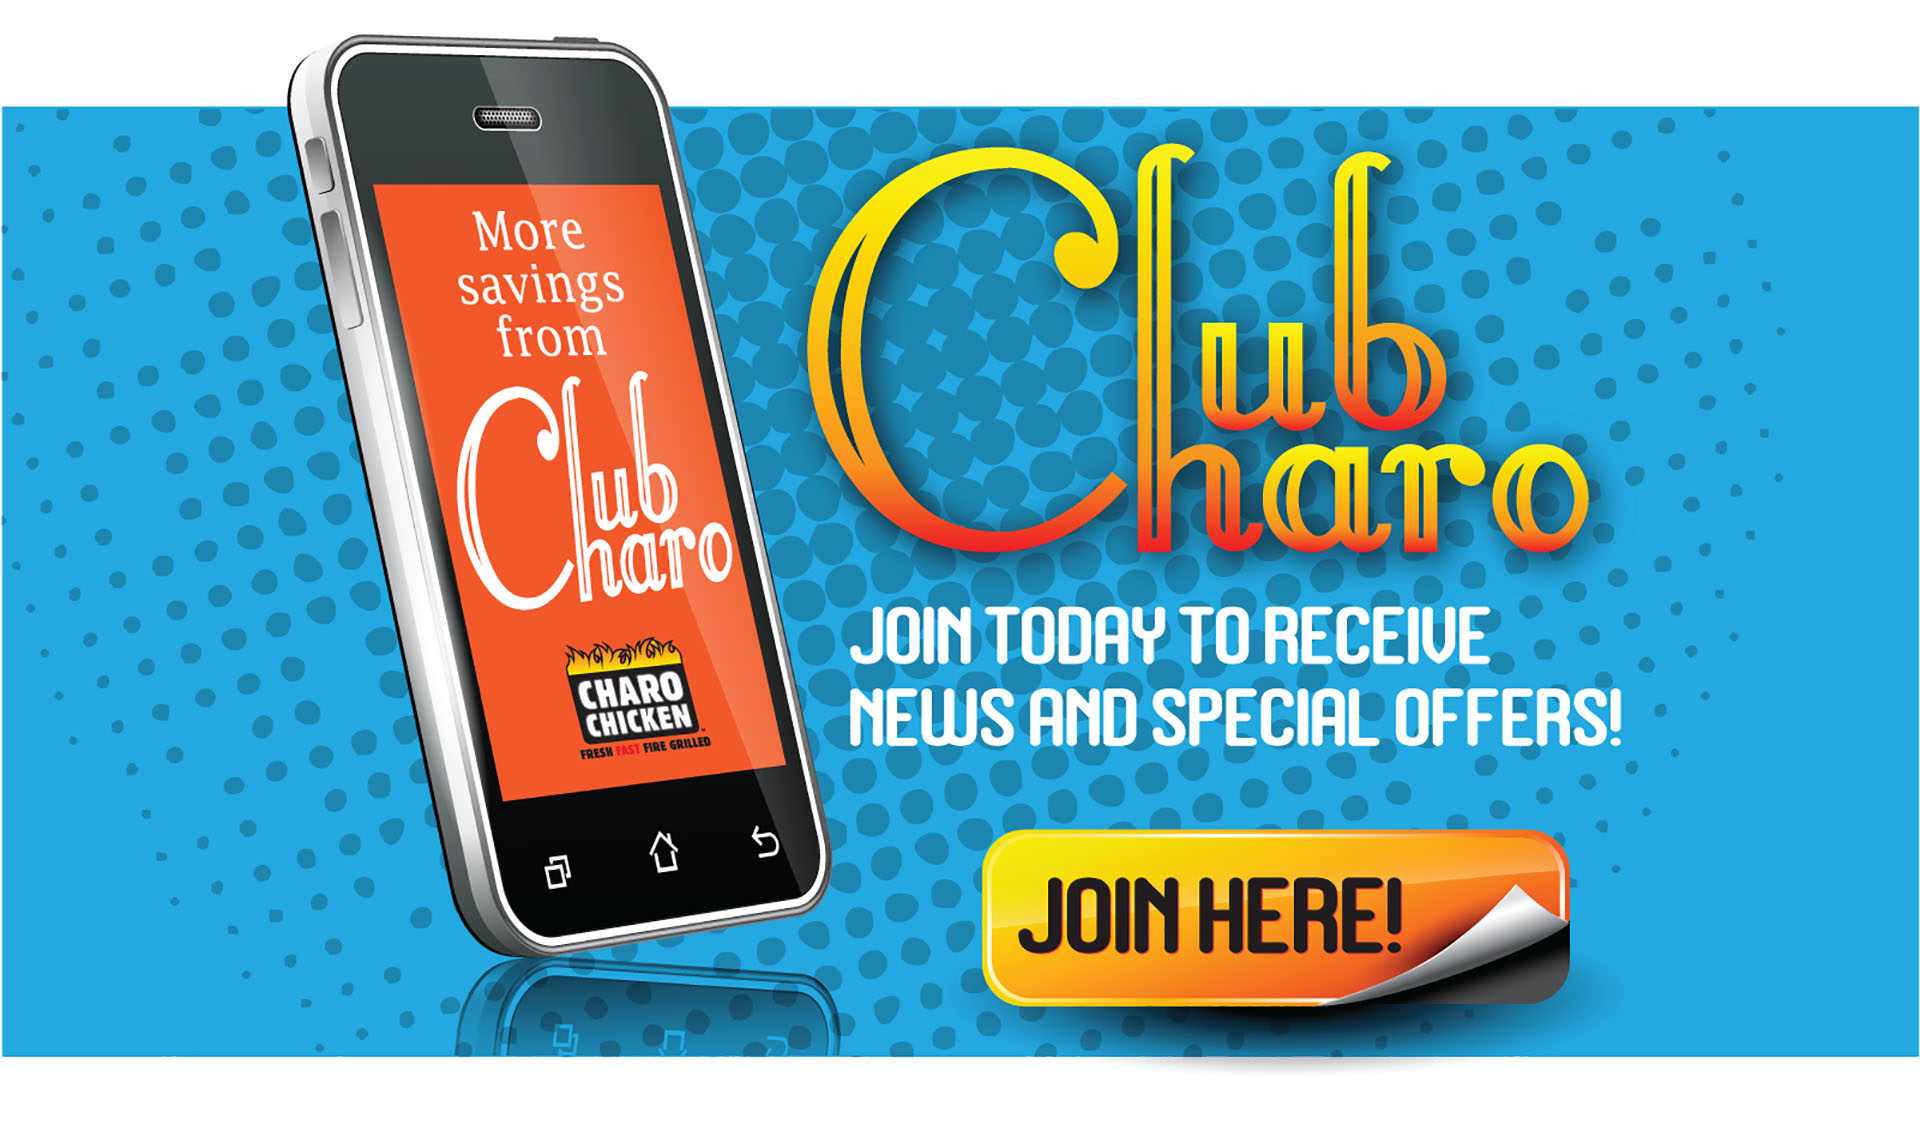 Club Charo click link button to sign up page. "Join Here"